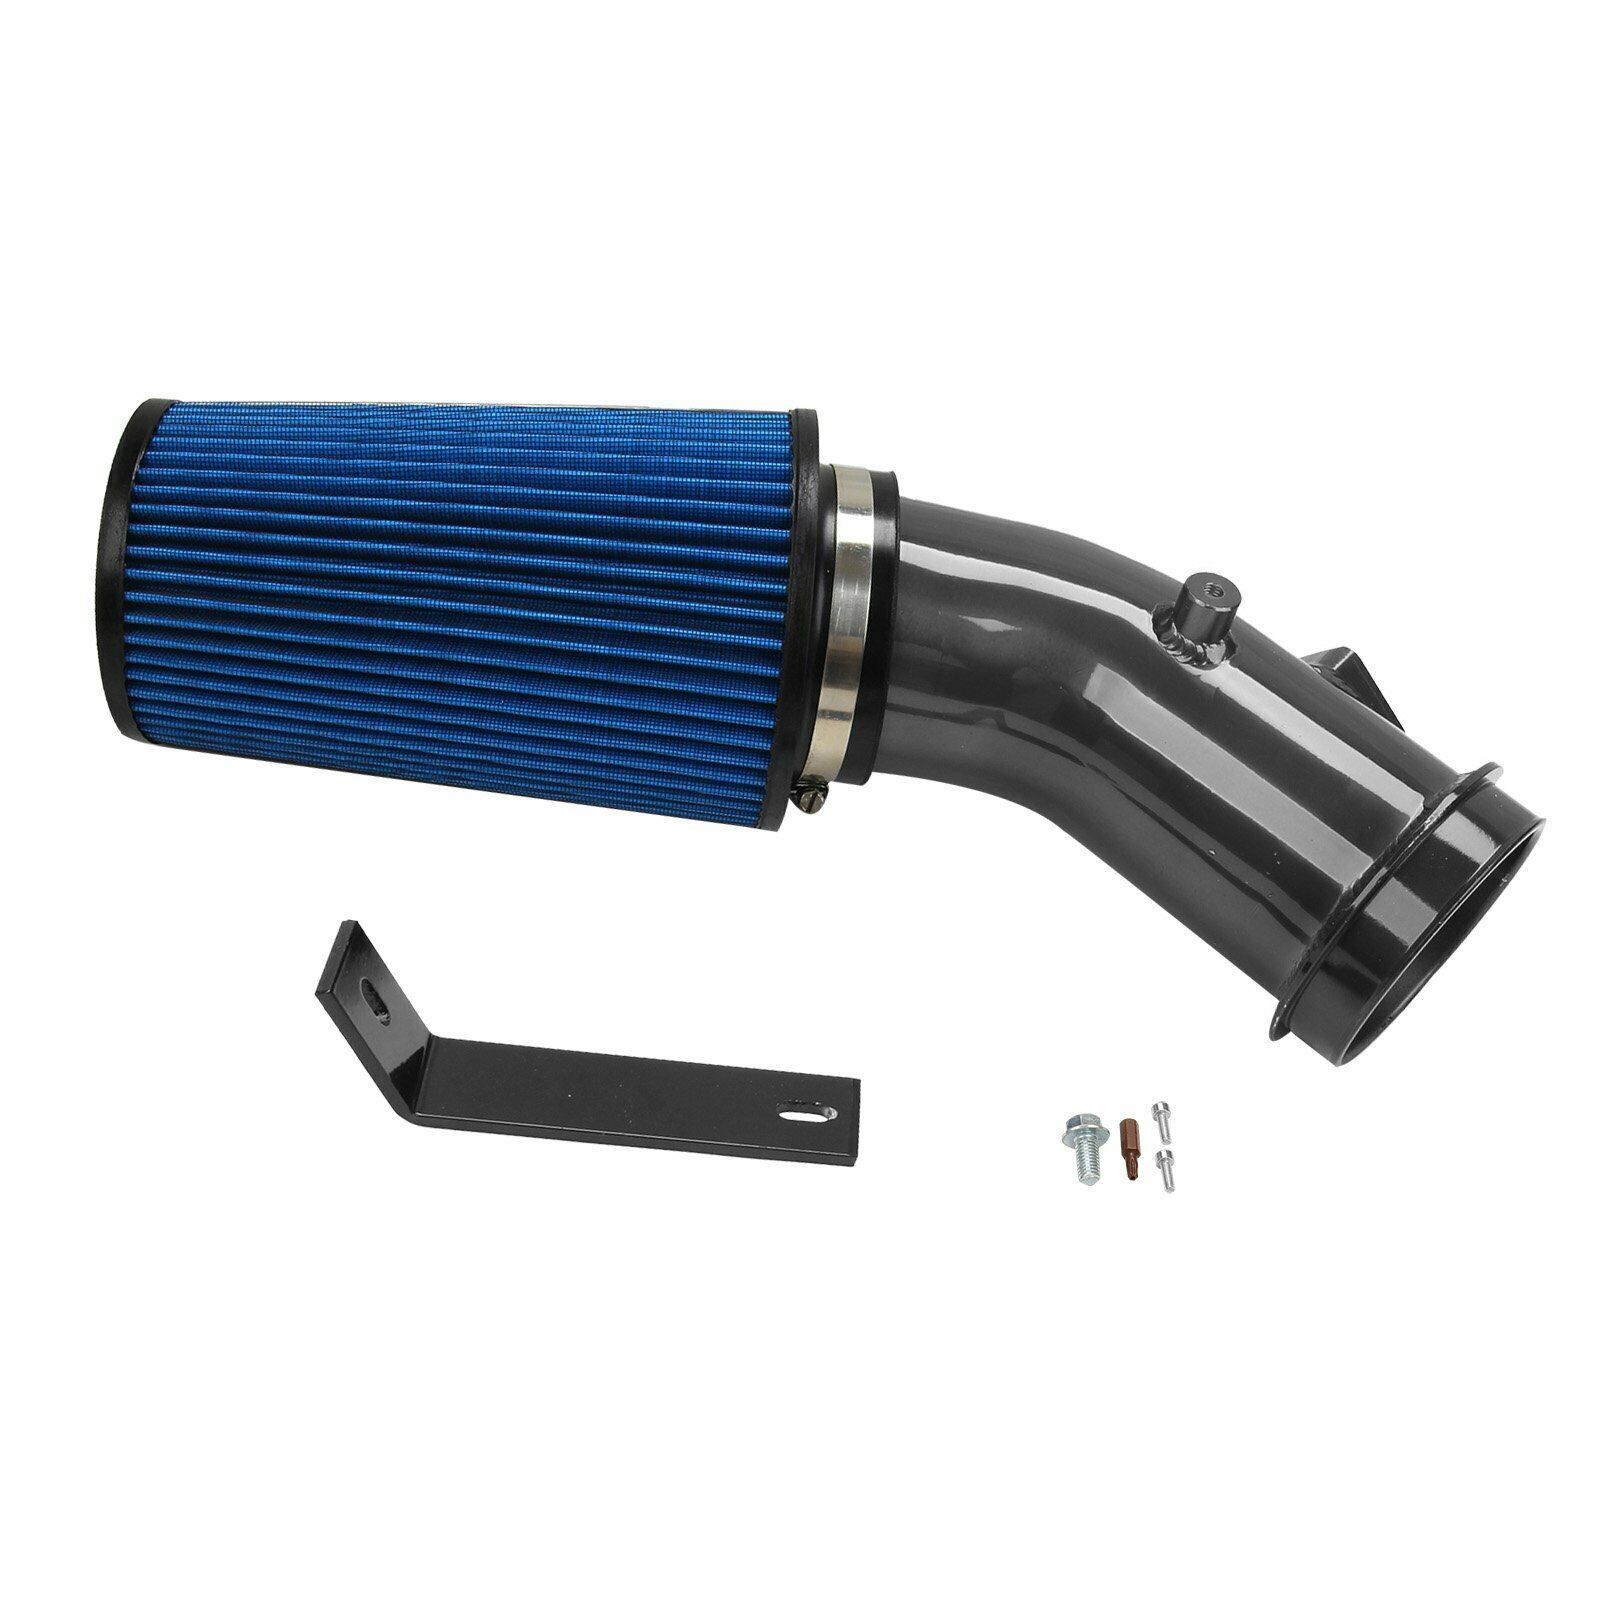 Oiled Cold Air Intake Kit for 2011-2016 Ford 6.7L Super Duty Powerstroke Diesel